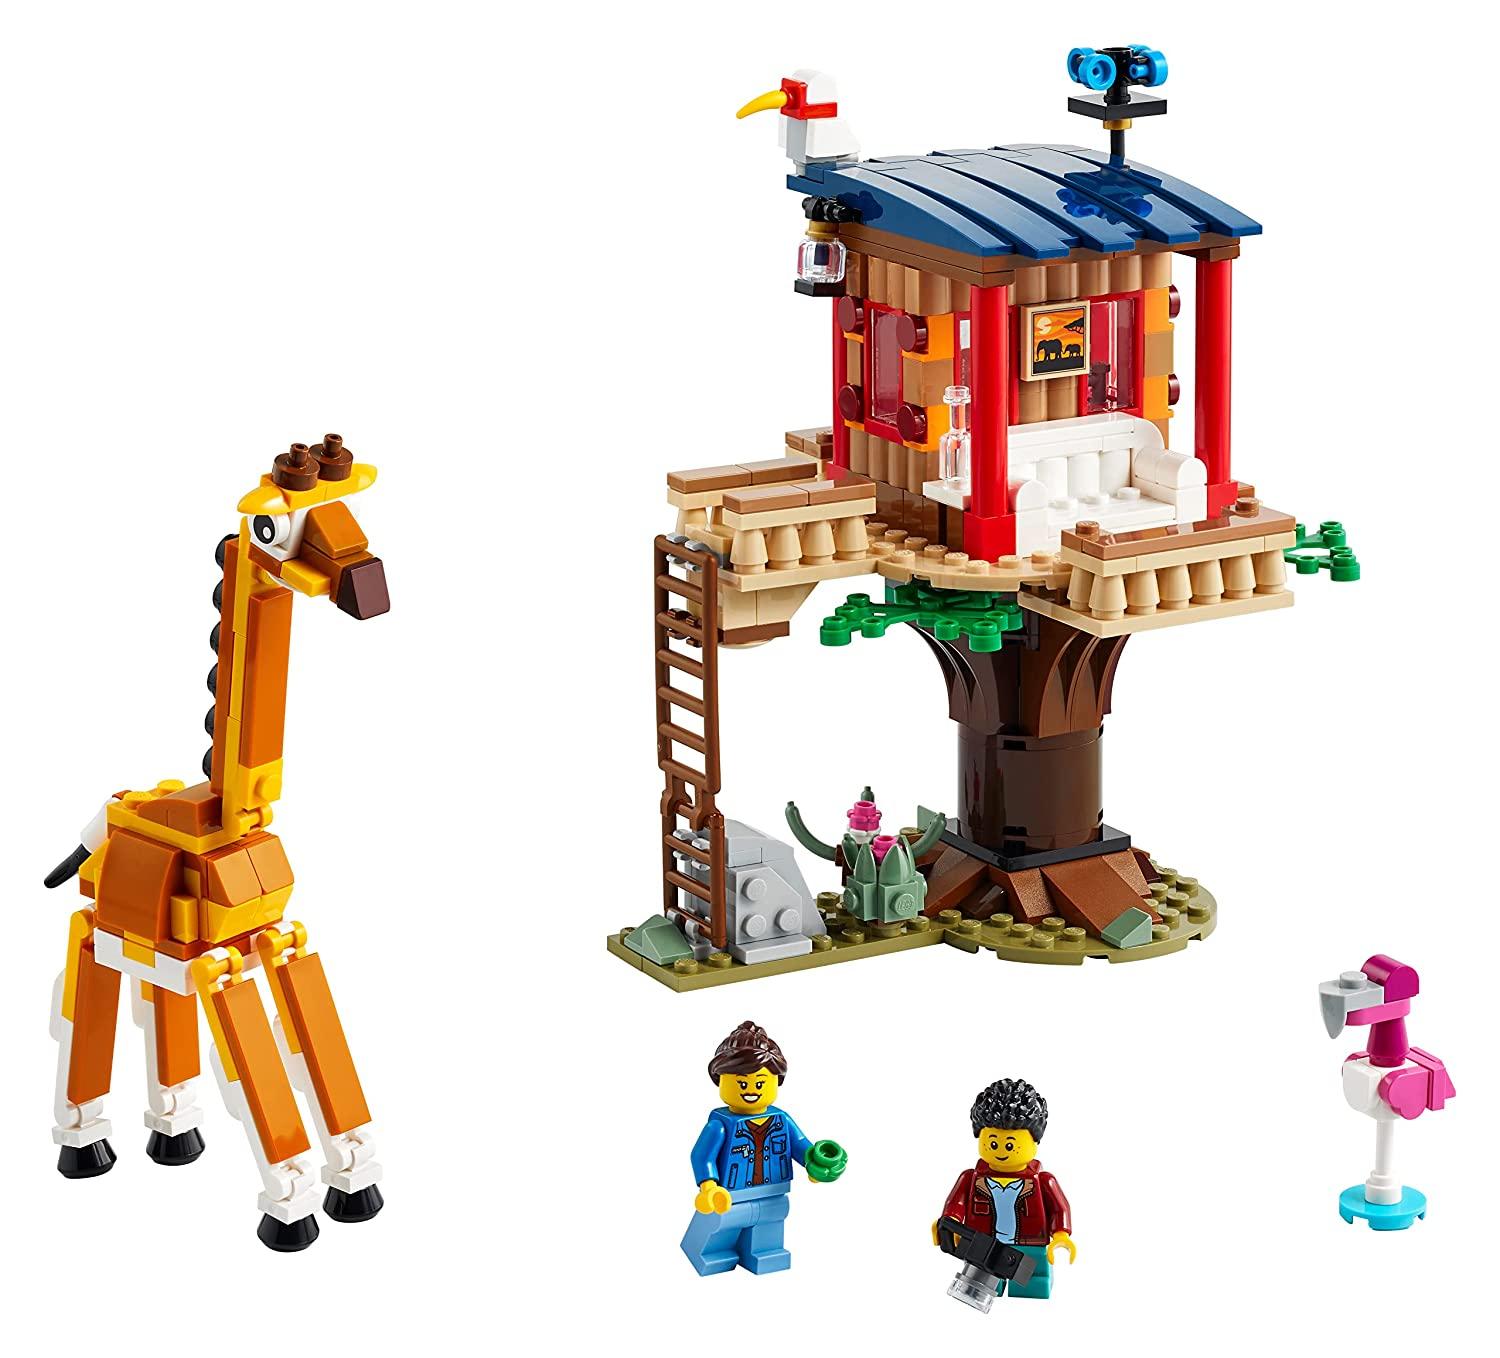 LEGO Creator 3in1 Safari Wildlife Tree House Building Kit for Ages 7+